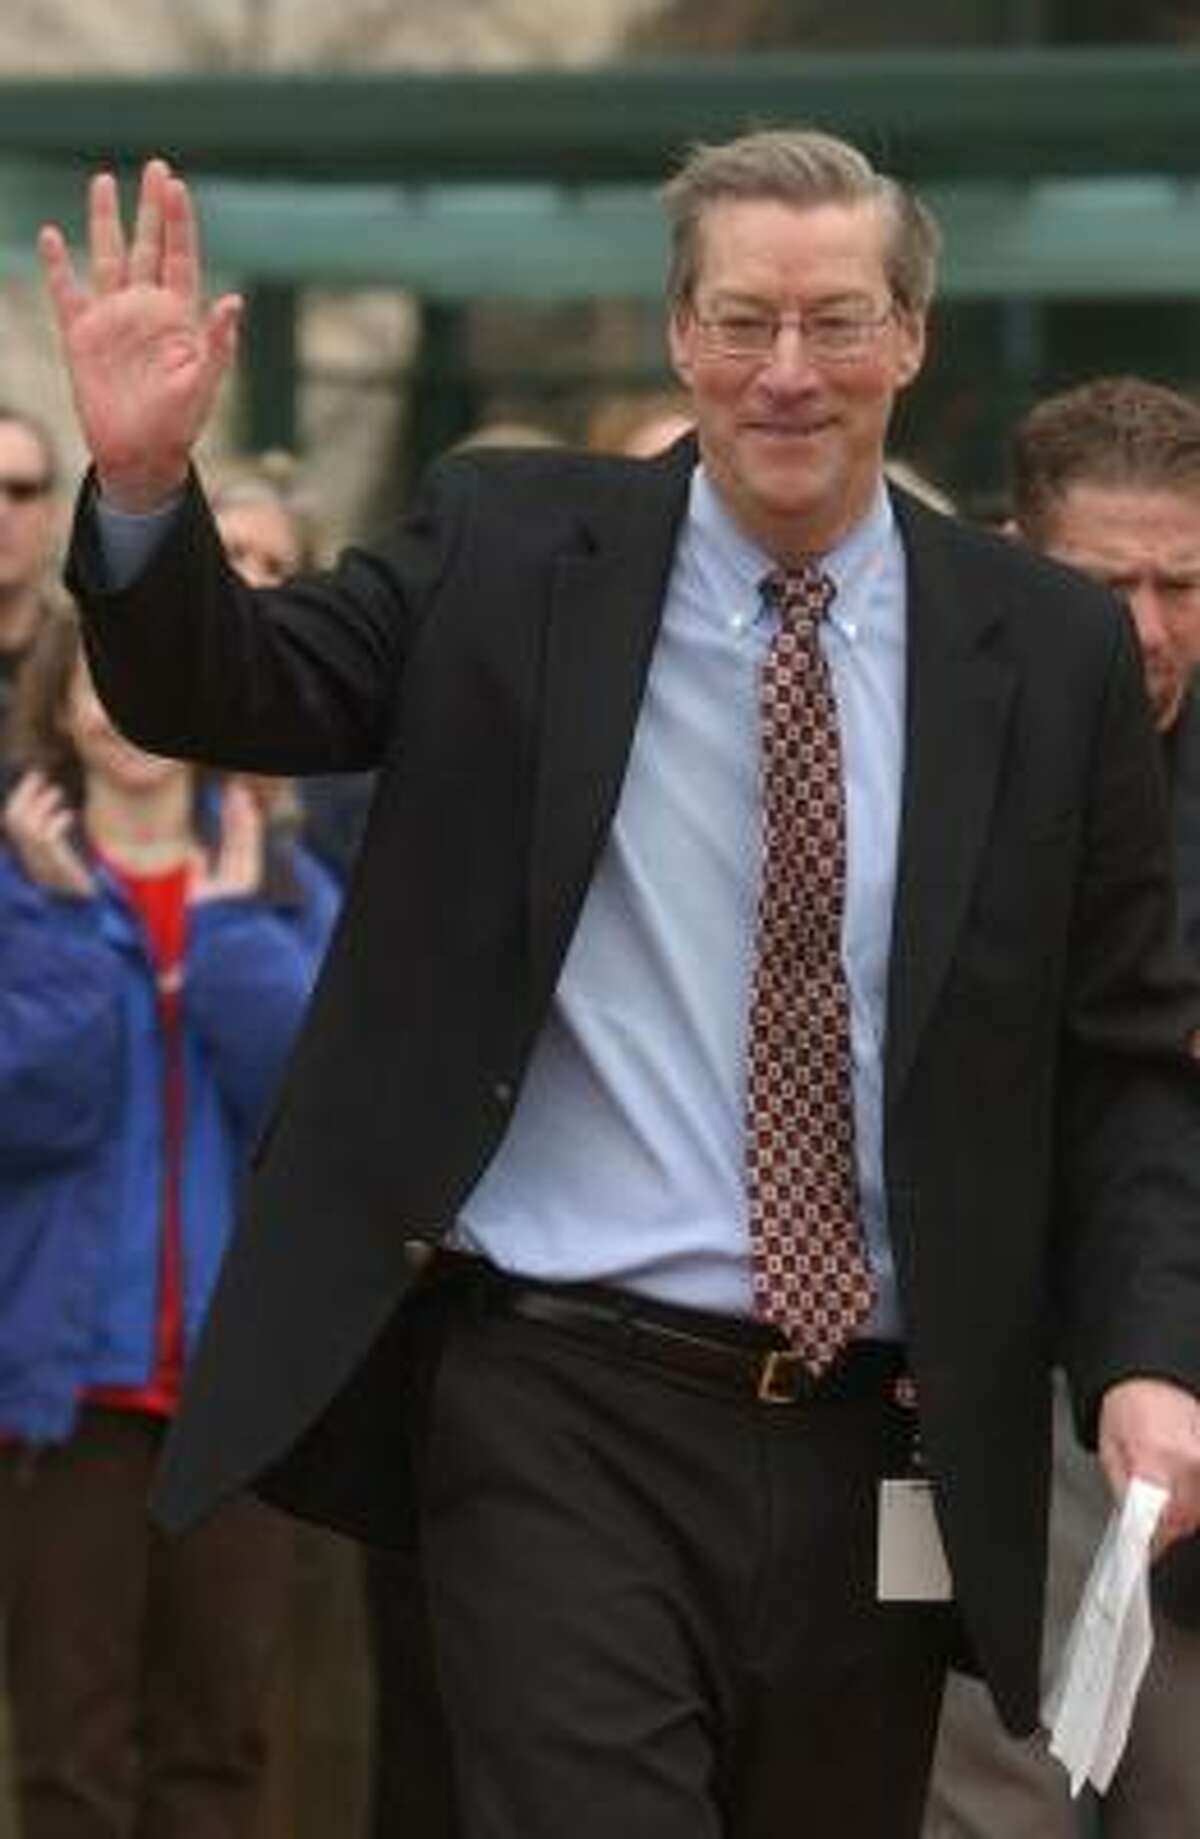 Dave Lesar, the chairman and CEO of Halliburton, attends the dedication of Halliburton Plaza at Minute Maid Park in 2003.